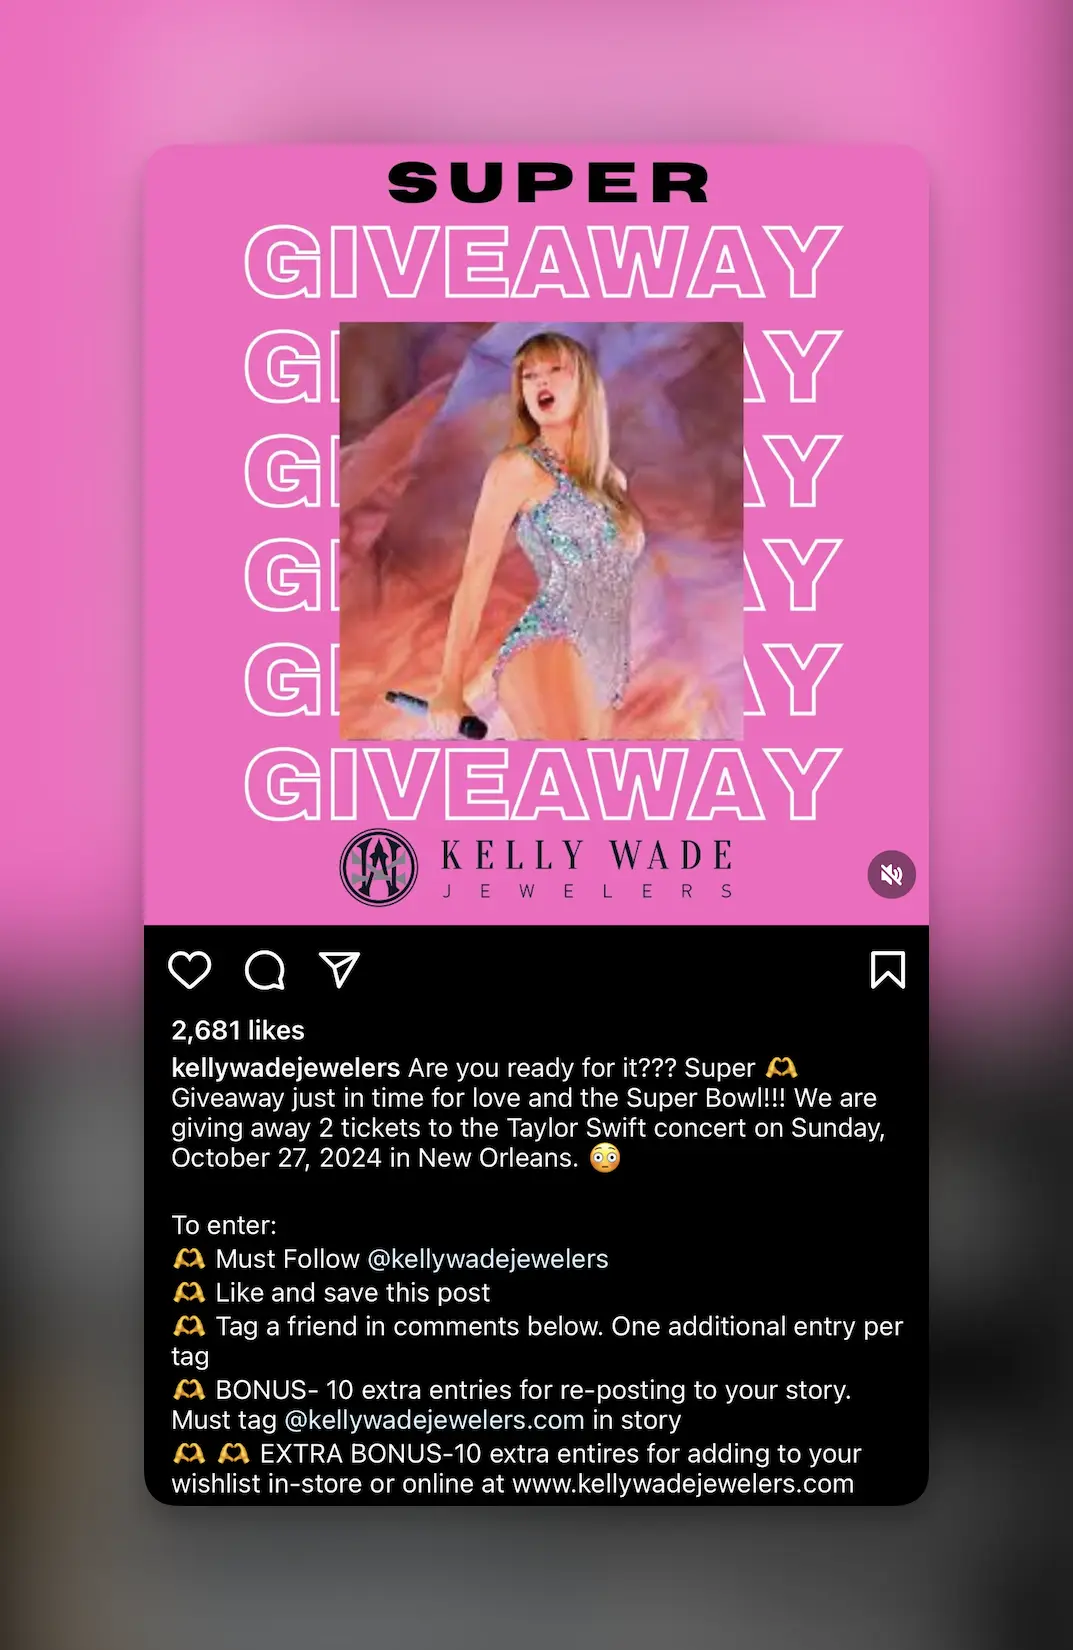 Instagram traditional giveaaway